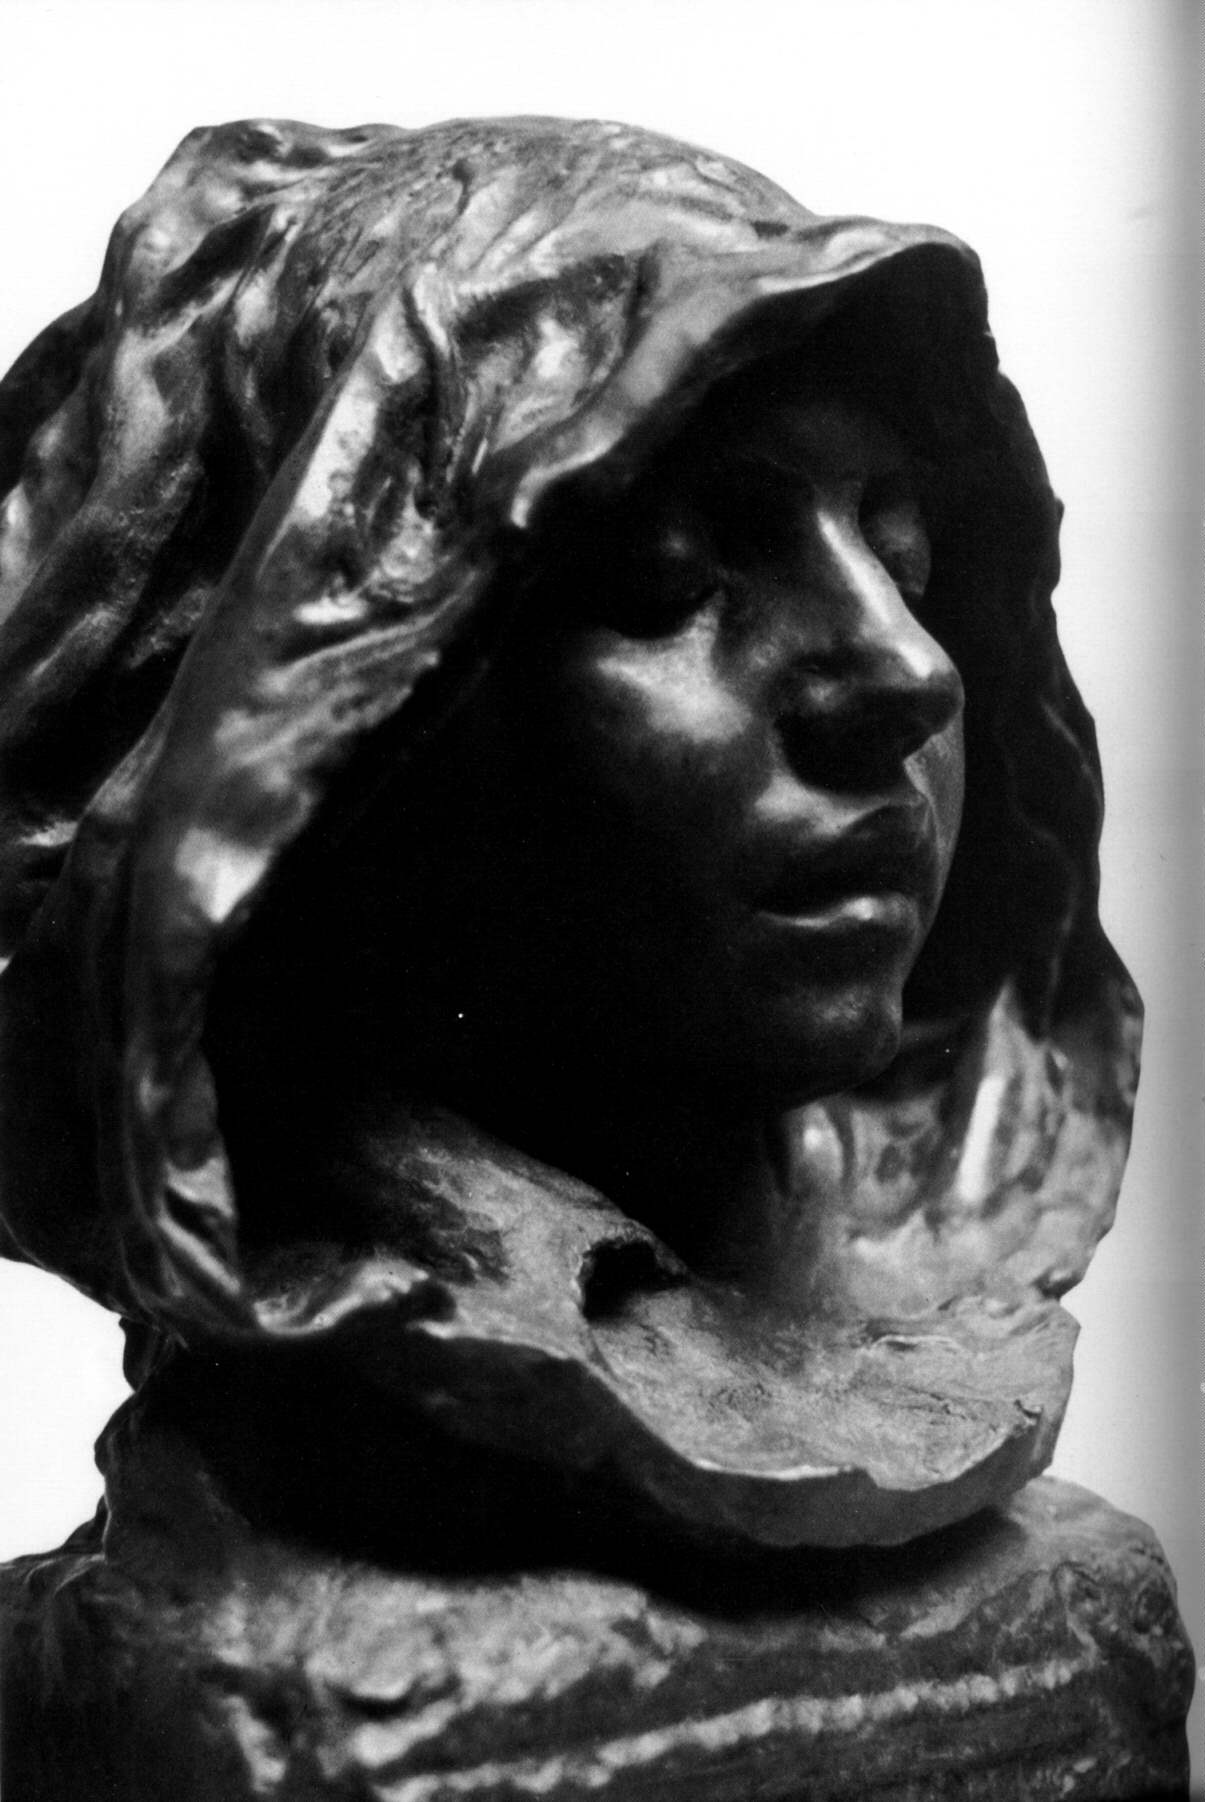 Prayer by Camille Claudel